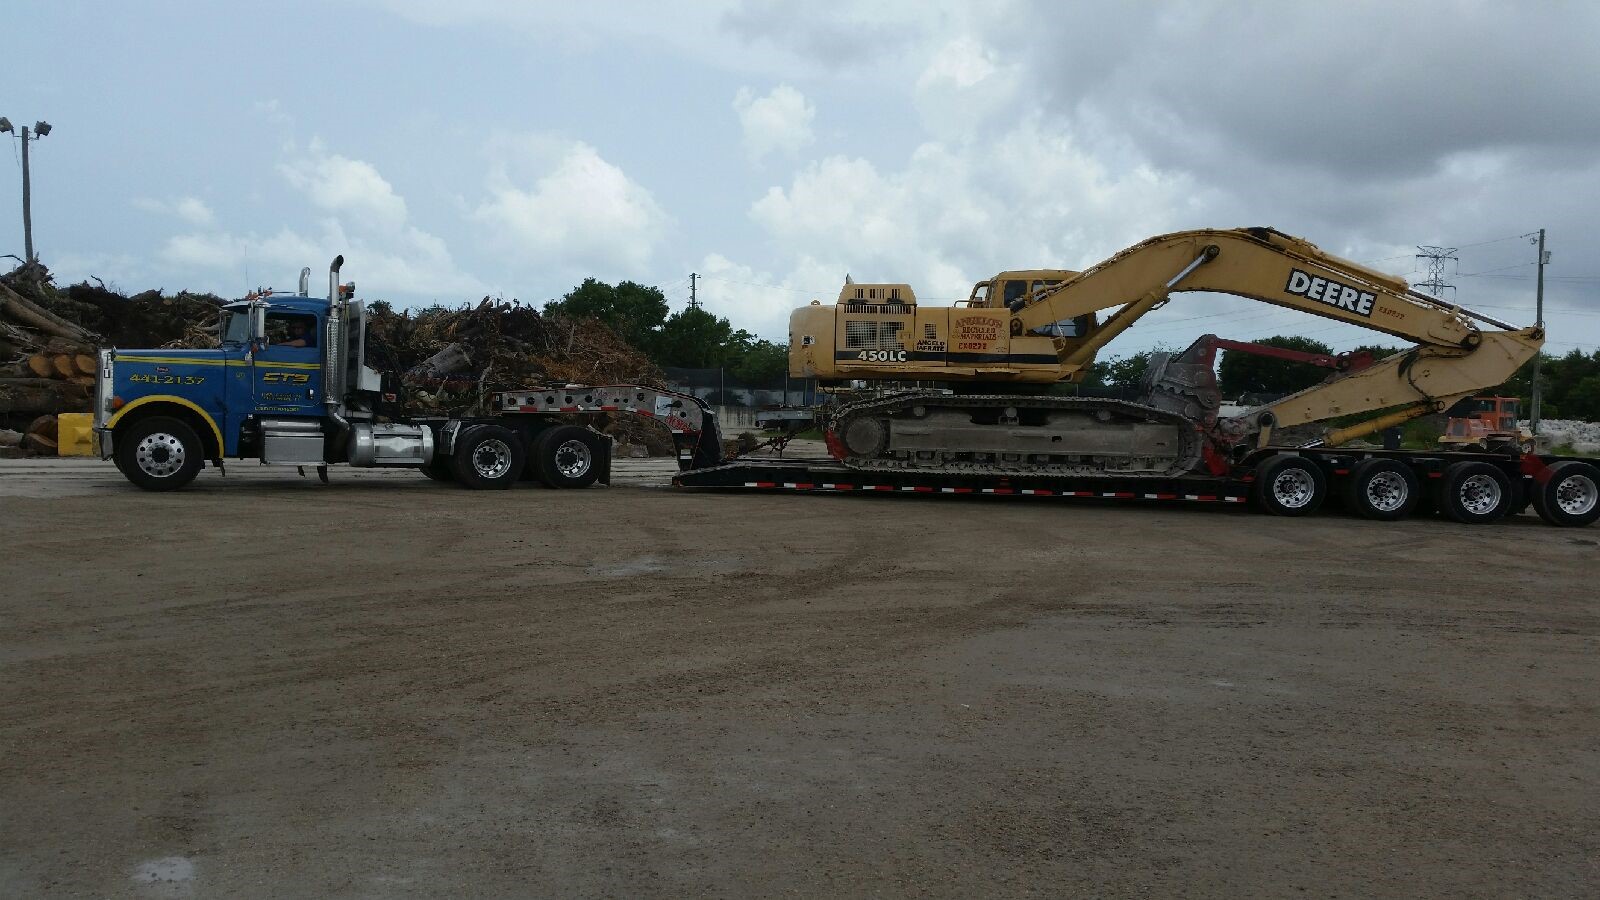 Lowboy excavator being towed by CTS Tow truck